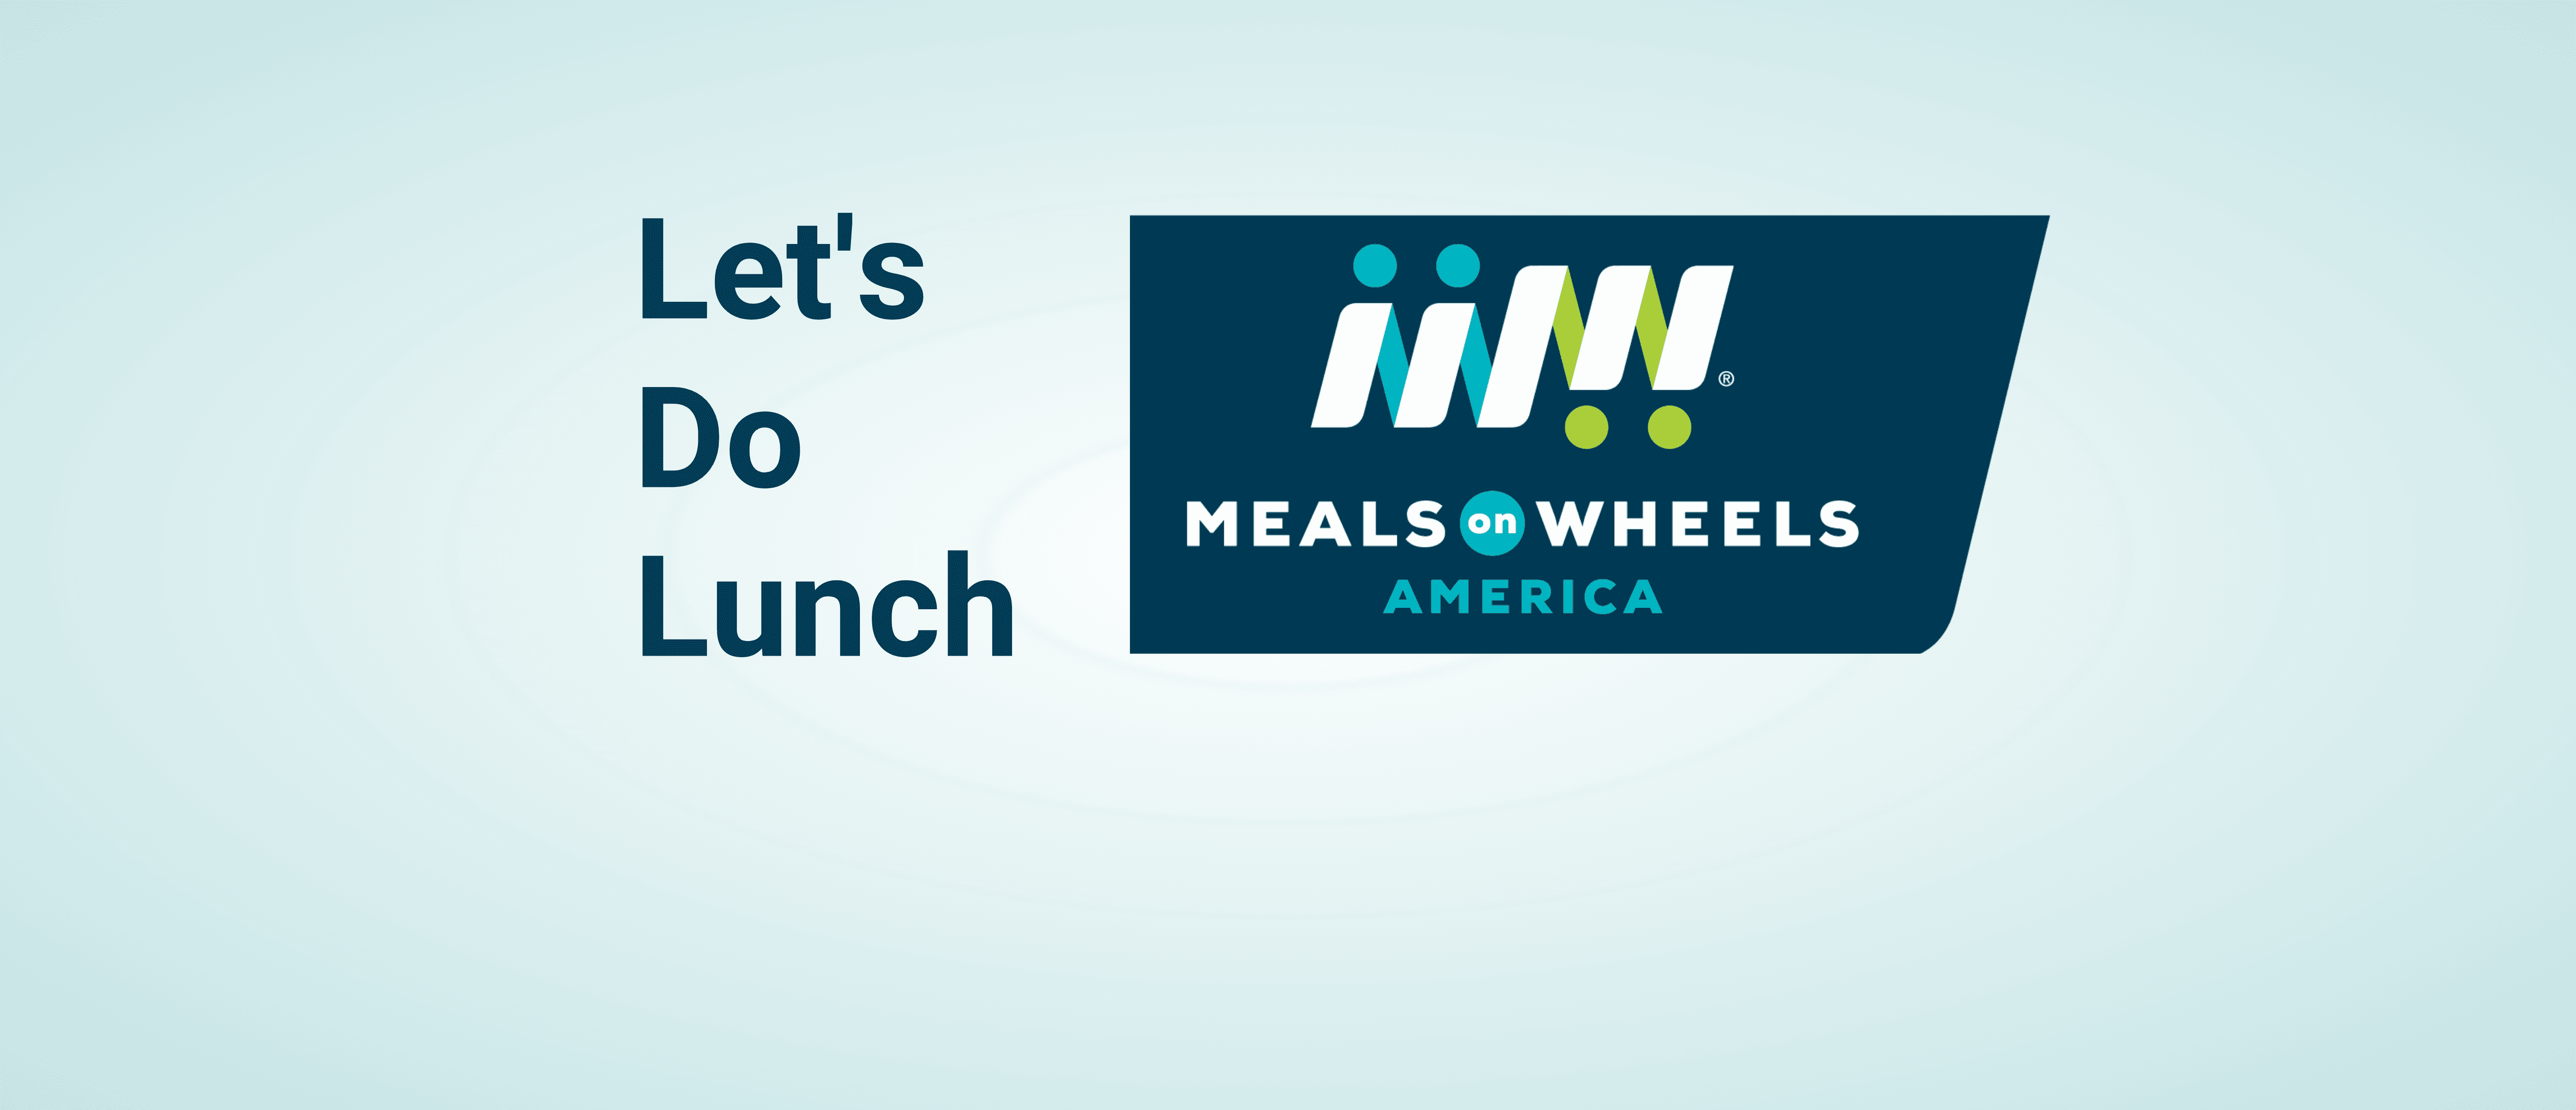 HAVE YOU CONSIDERED VOLUNTEERING FOR MEALS ON WHEELS?